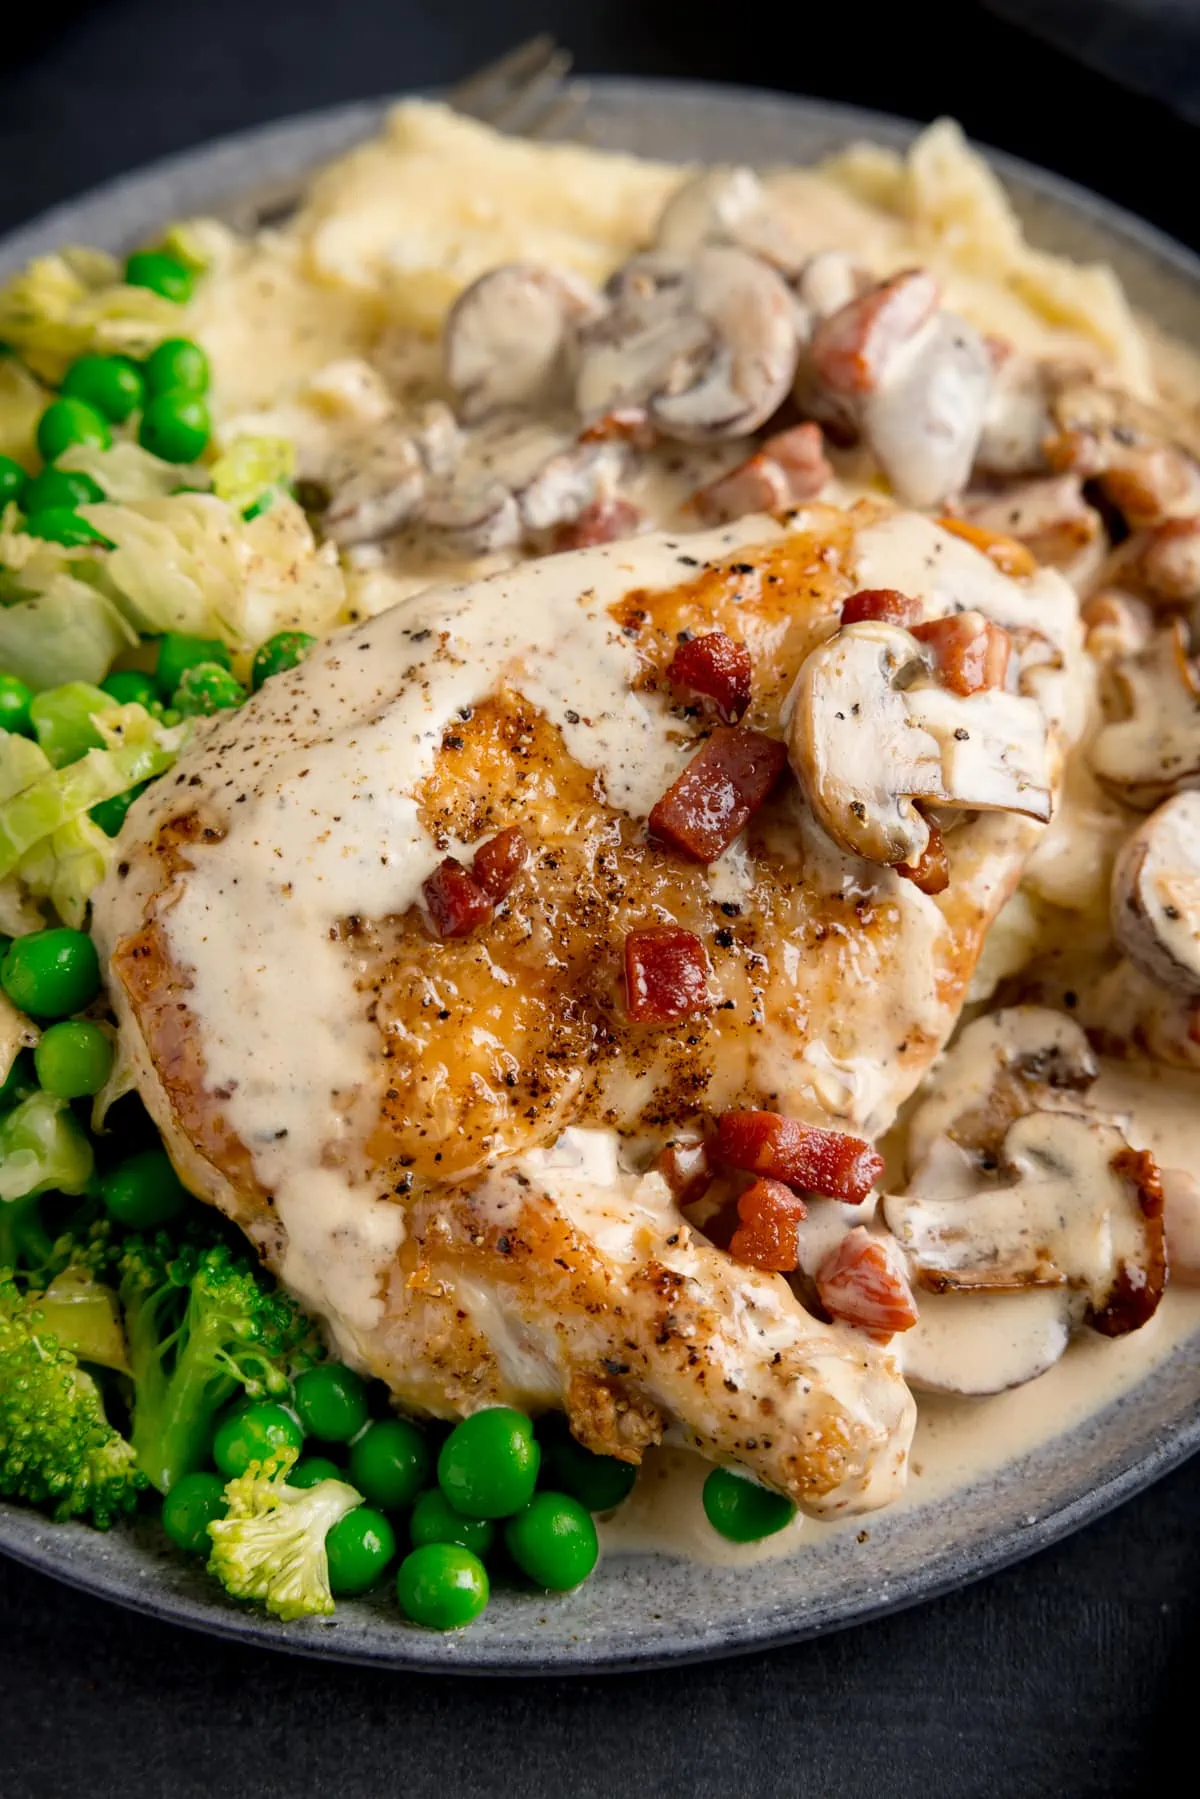 Chicken supreme with mushrooms and pancetta on a plate with mashed potato and green vegetables. The creamy sauce is drizzled over the chicken.